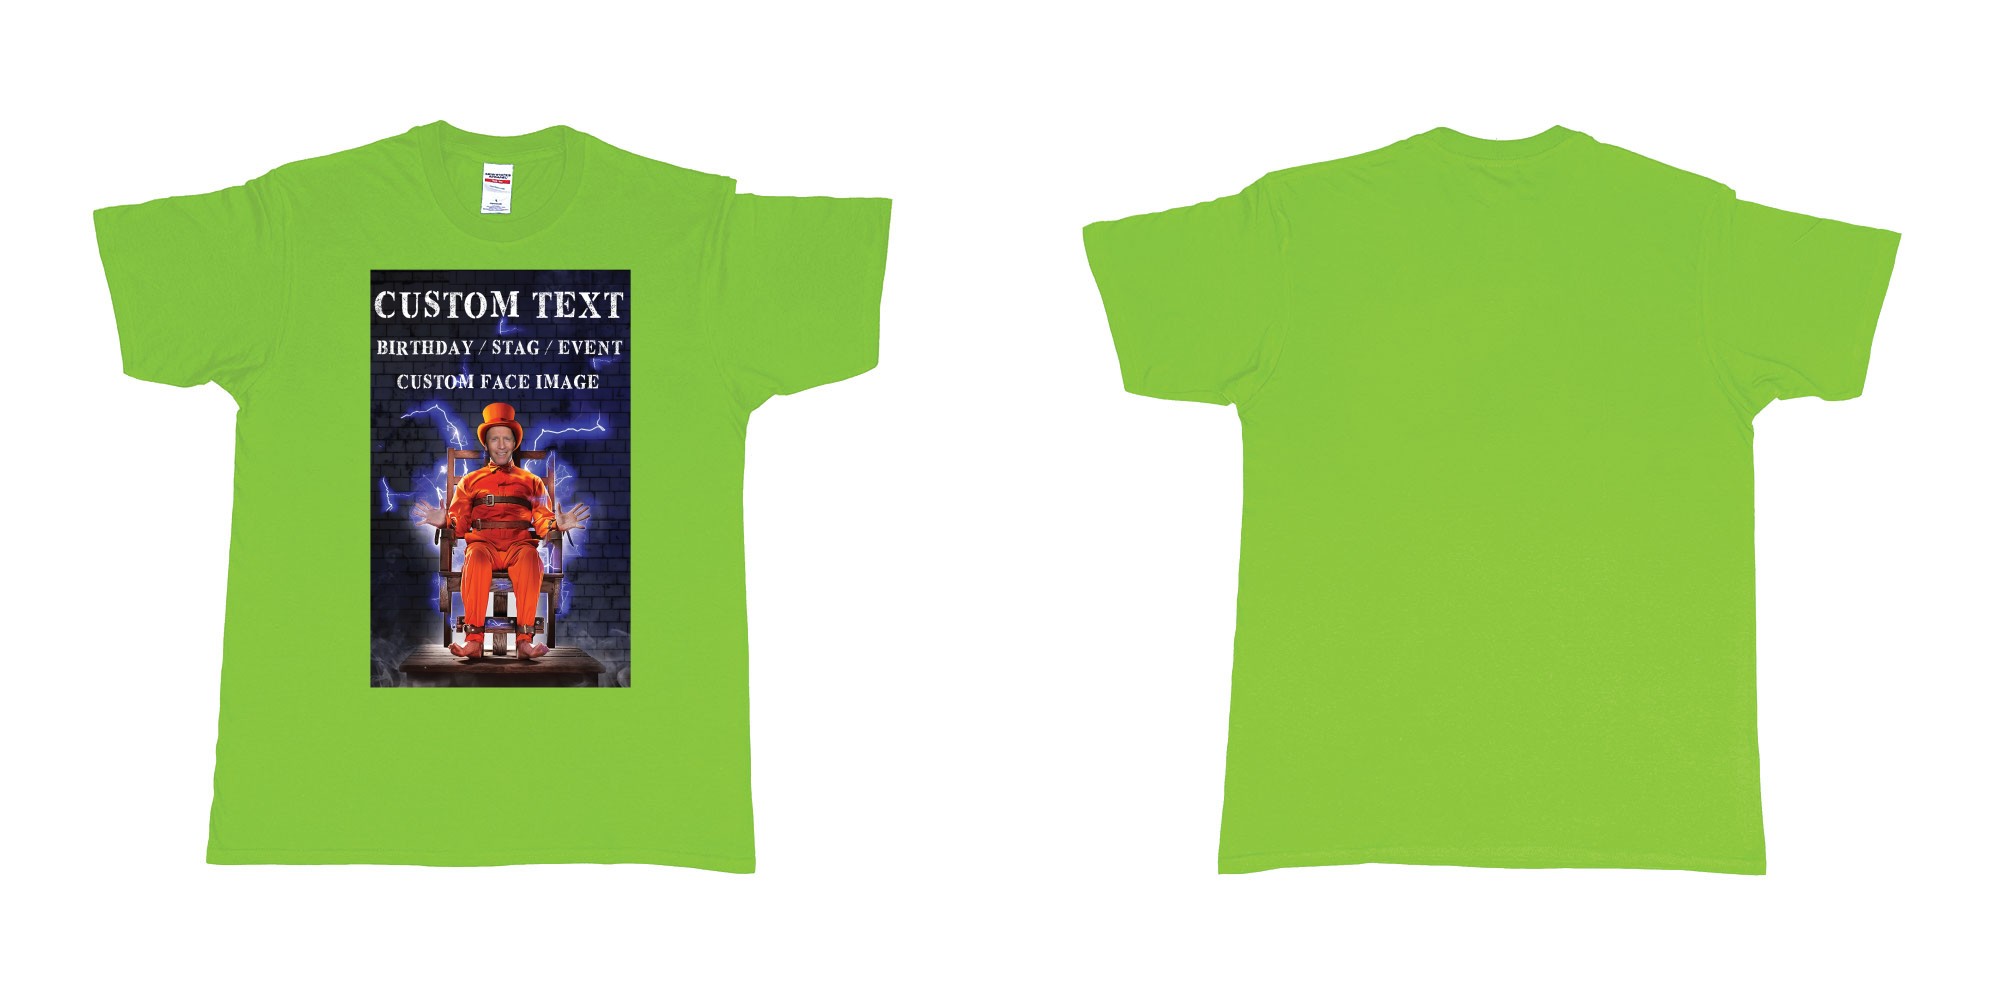 Custom tshirt design stevo guilty as charged custom face image electric chair in fabric color lime choice your own text made in Bali by The Pirate Way